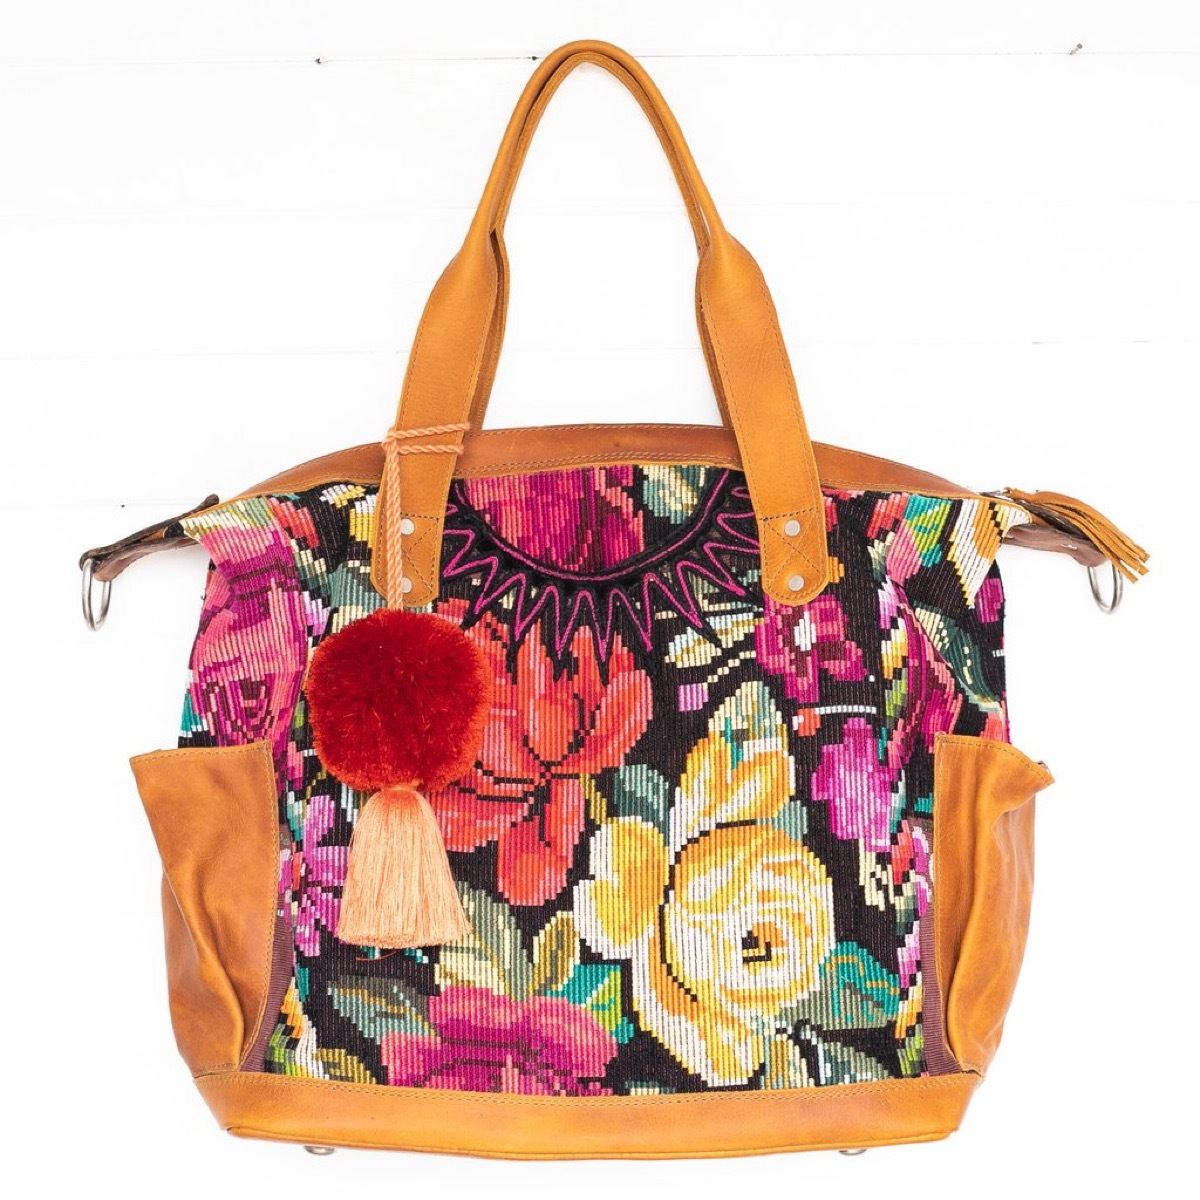 Floral embroidered bag with pom pom